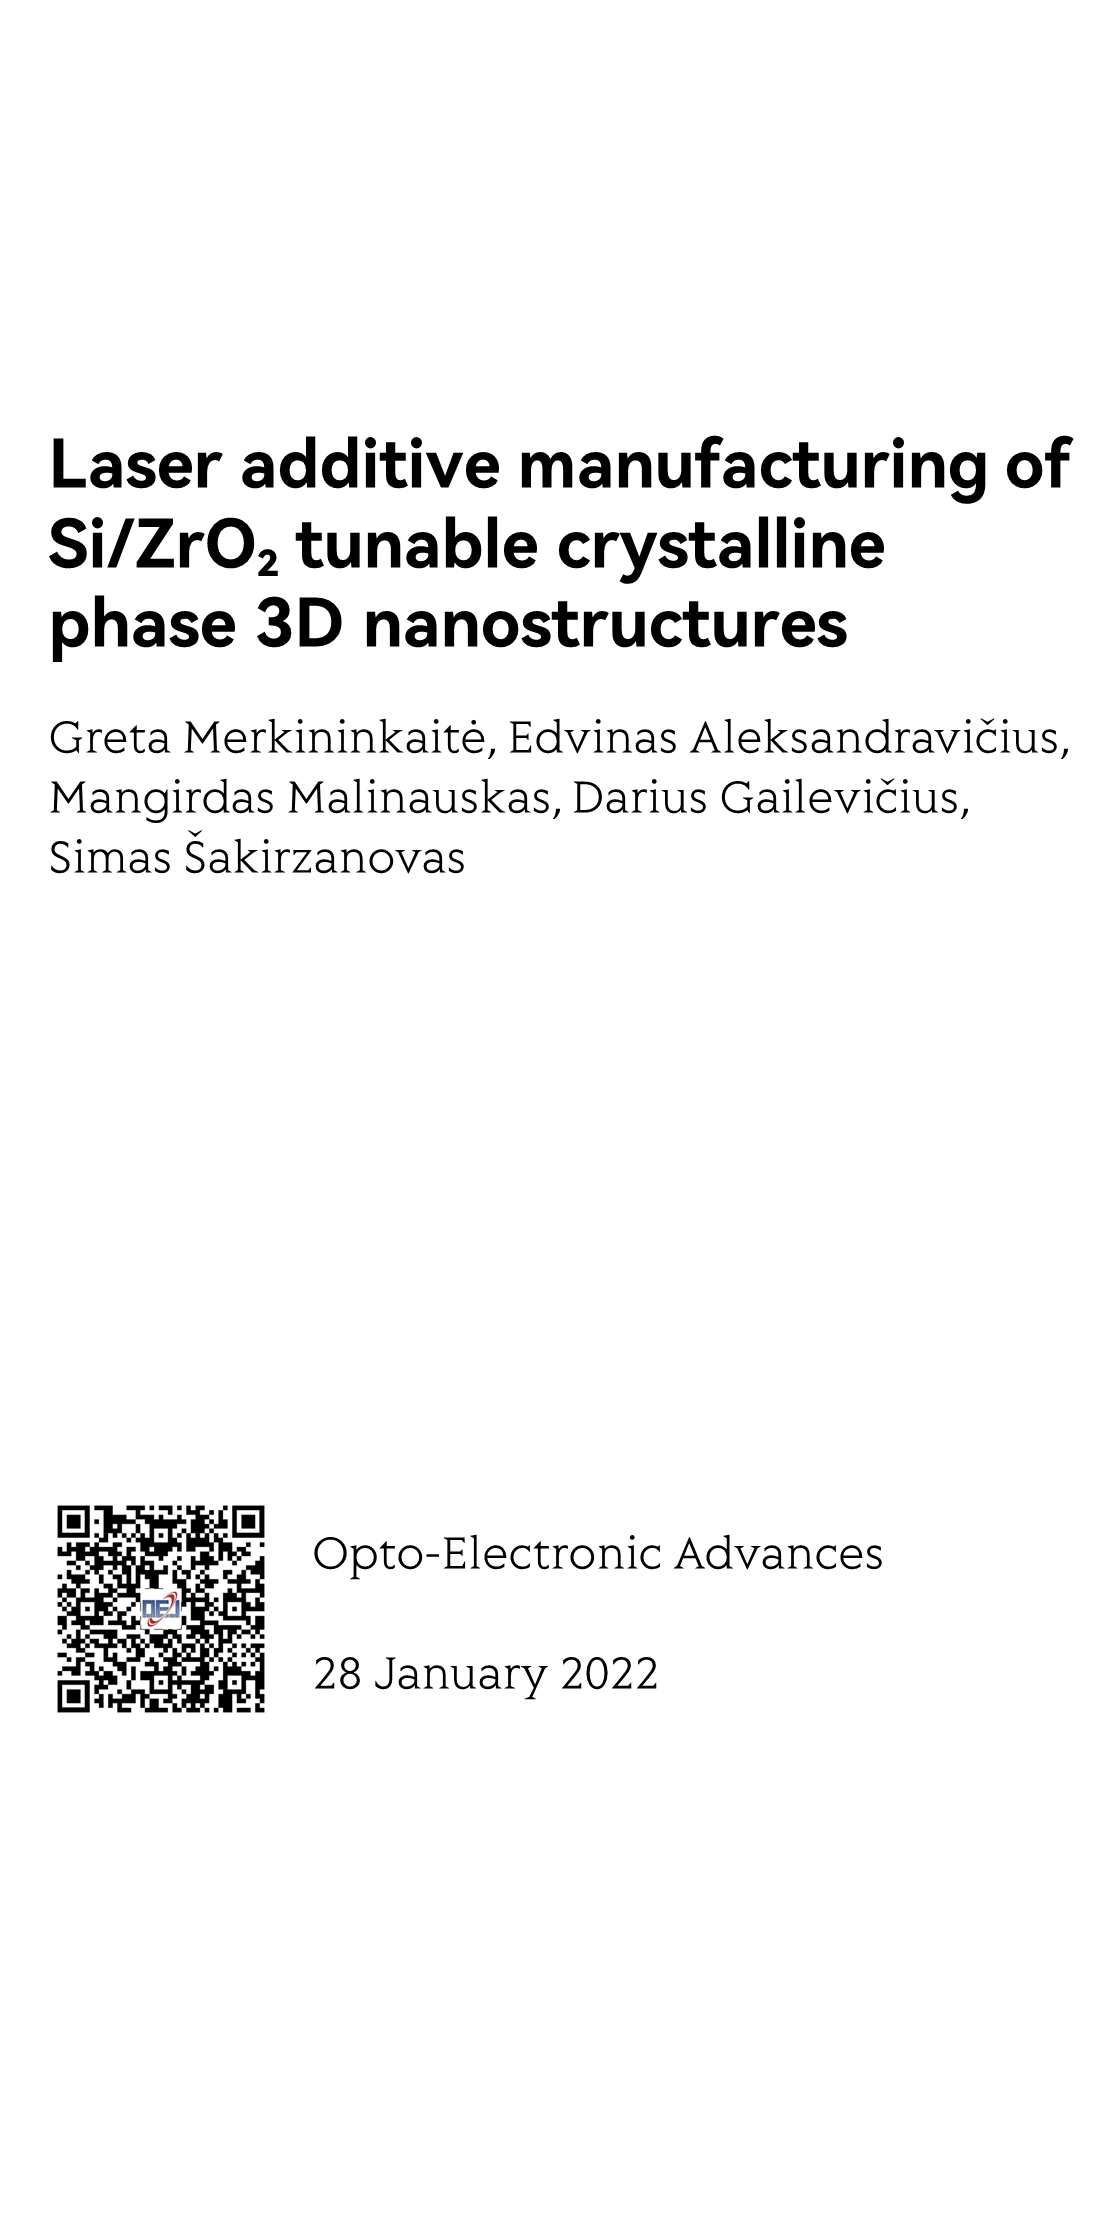 Laser additive manufacturing of Si/ZrO2 tunable crystalline phase 3D nanostructures_1